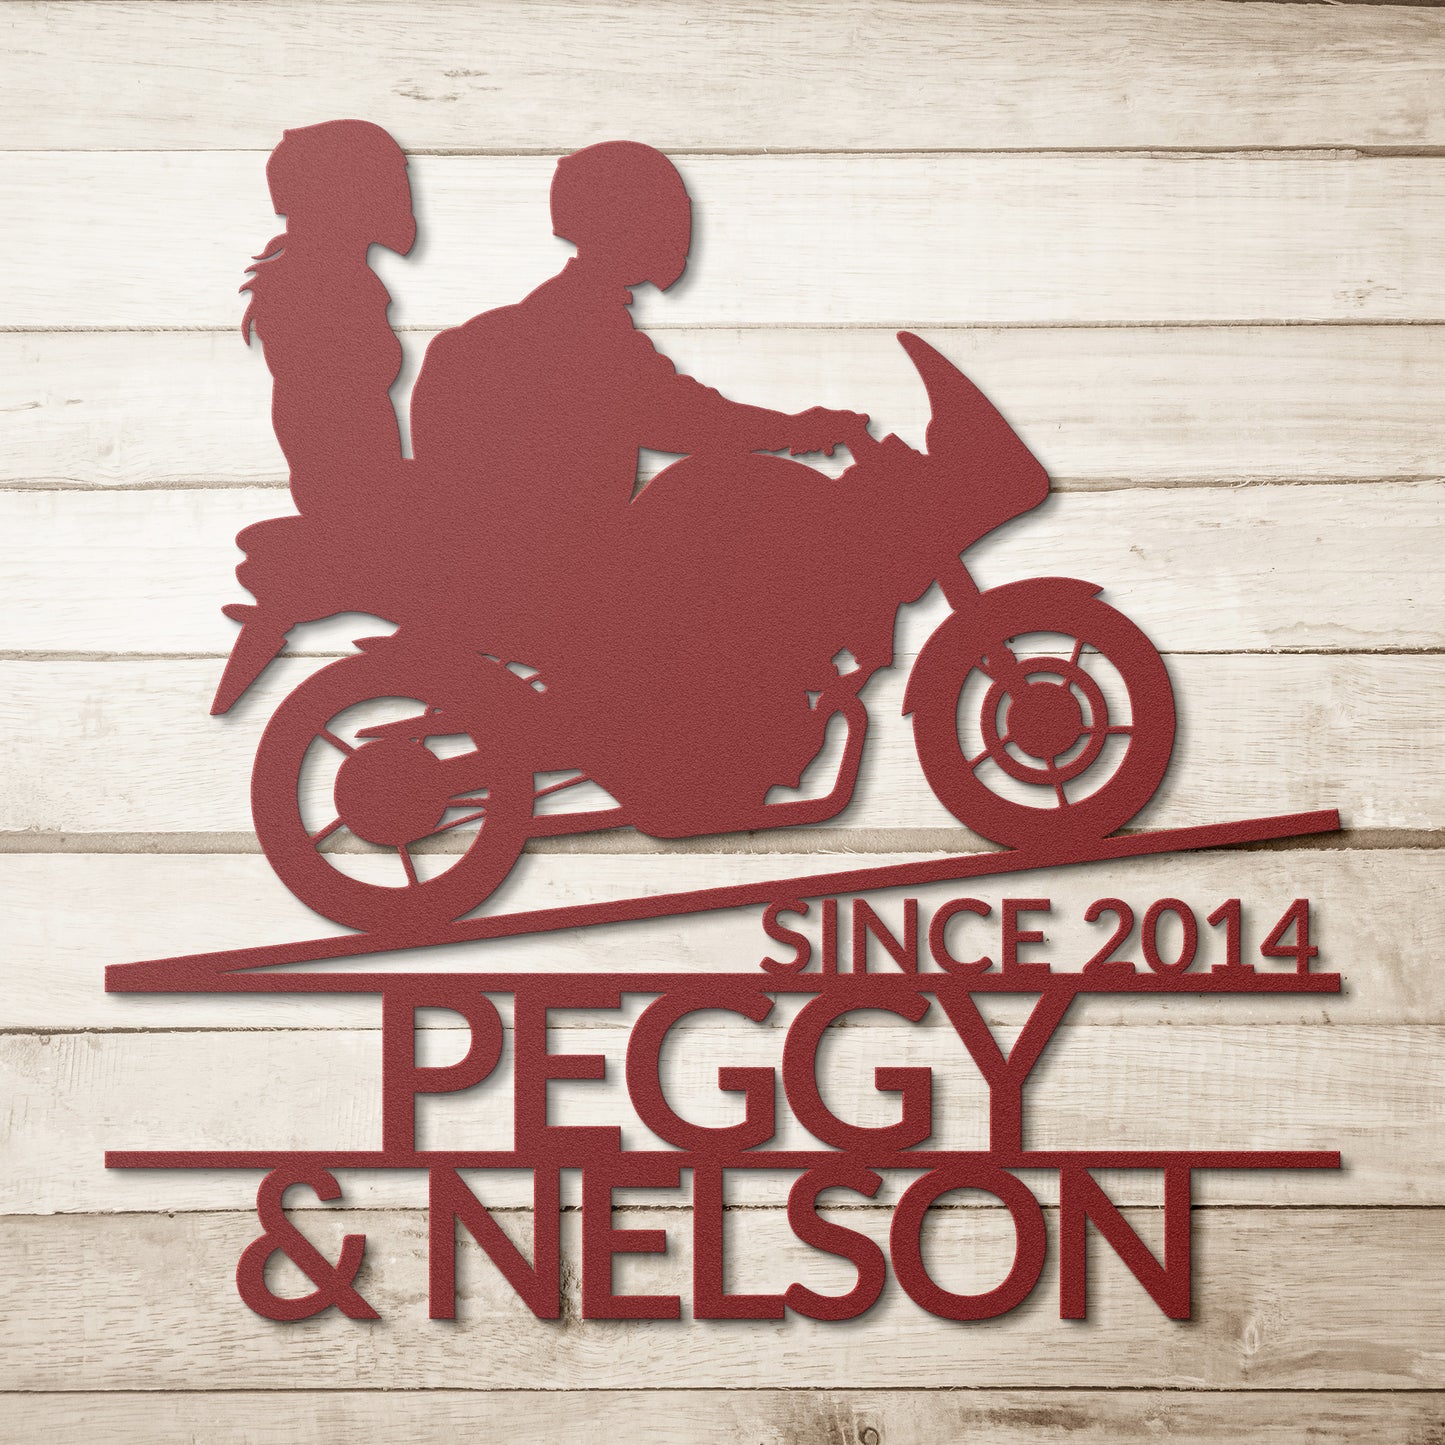 A black Custom Motorcycle Couple Metallic Wall Art featuring a couple riding on a racer bike, personalized with the names Peggy and Nelson and established year since 2014.